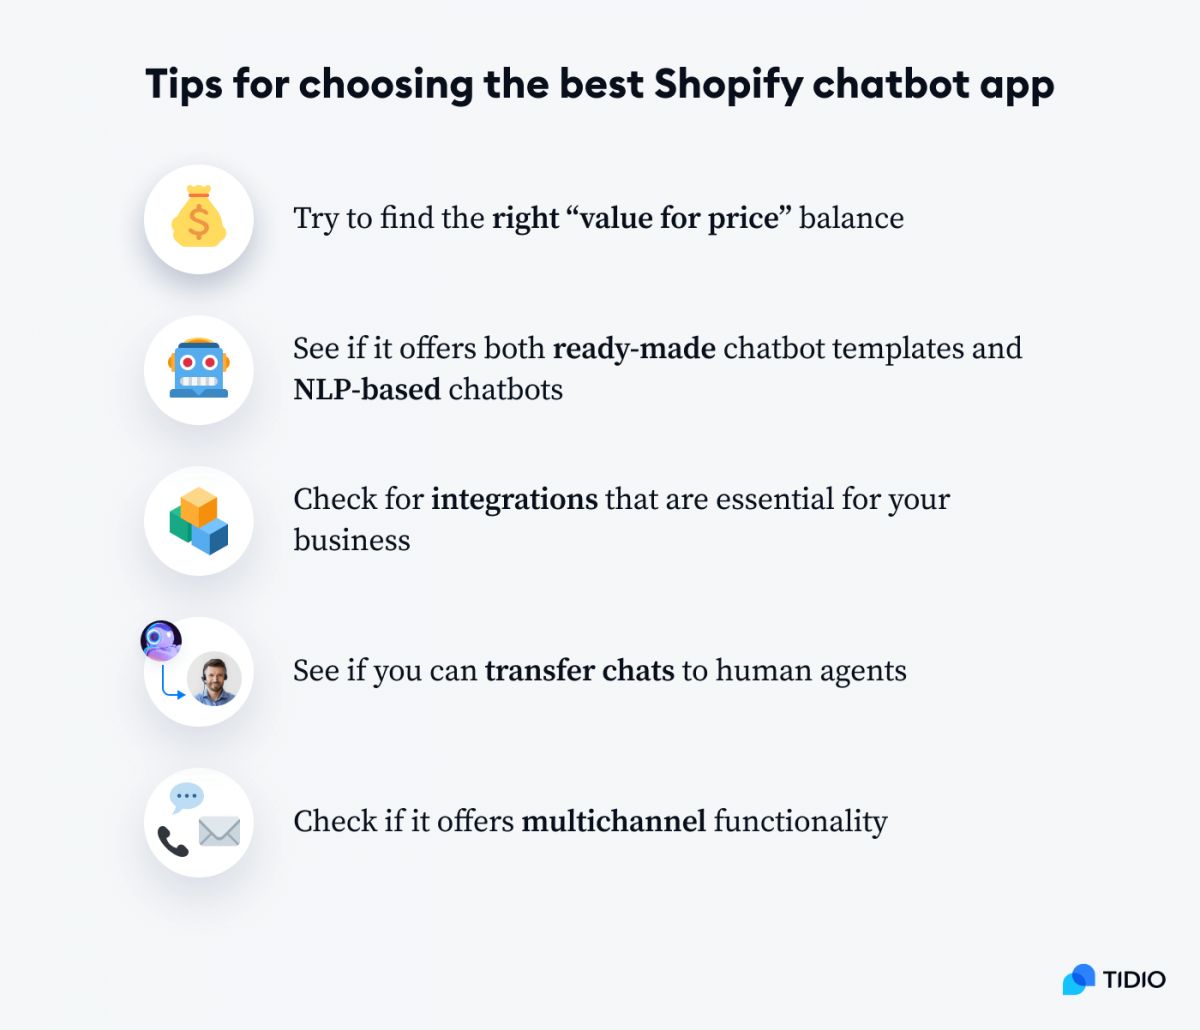 Infographic with tips for choosing the best Shopify chatbot app